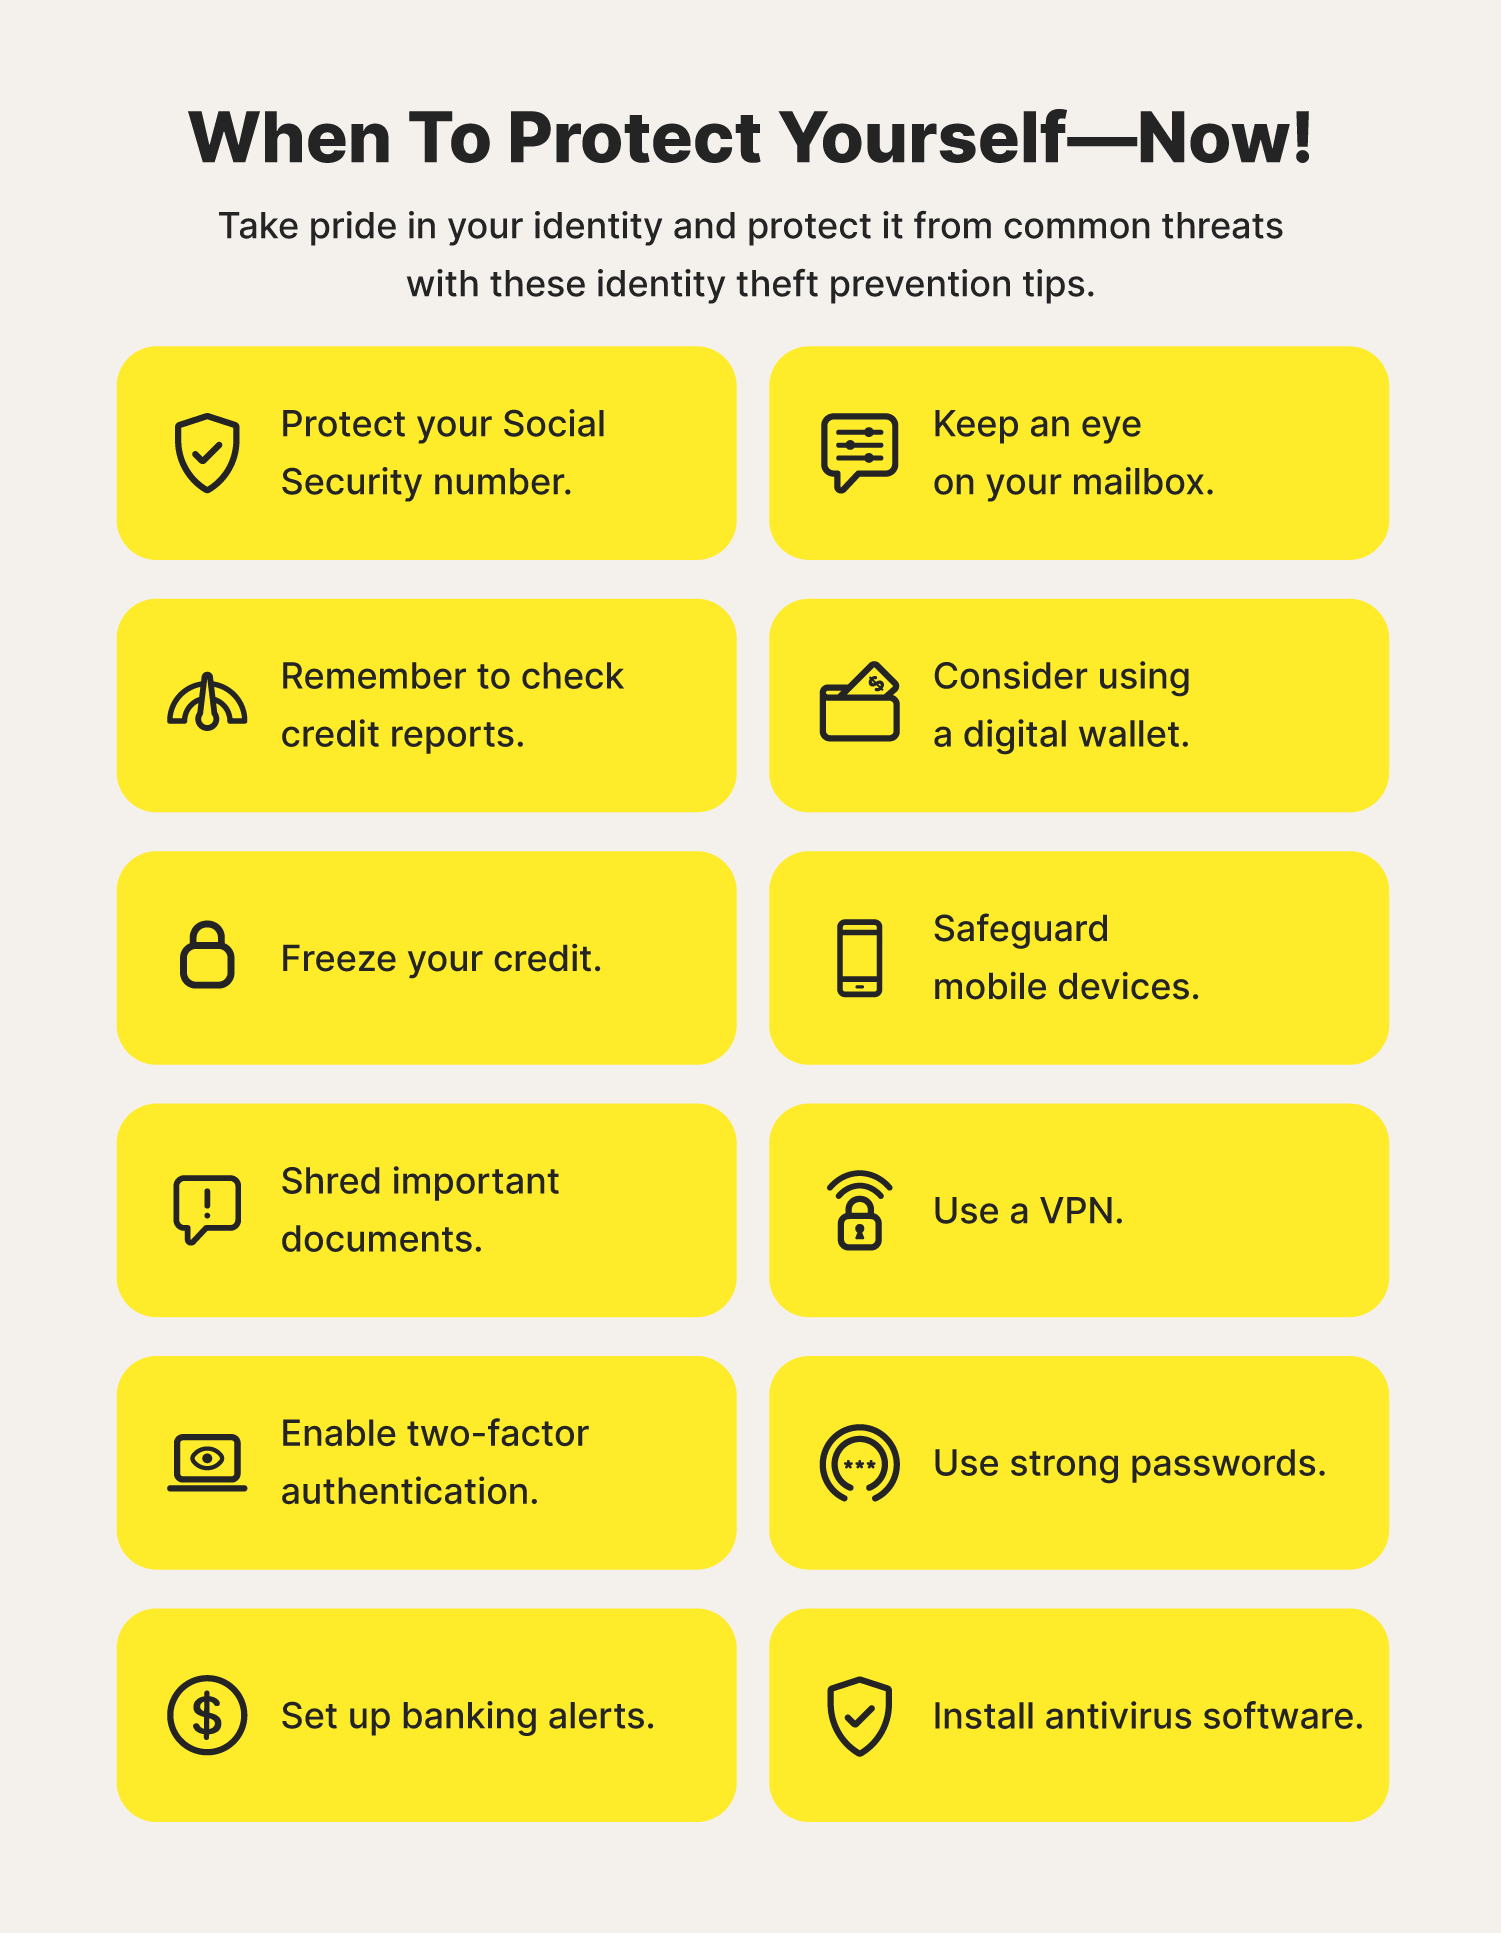 Twelve illustrations accompany the identity theft prevention tips that can help prevent identity theft.